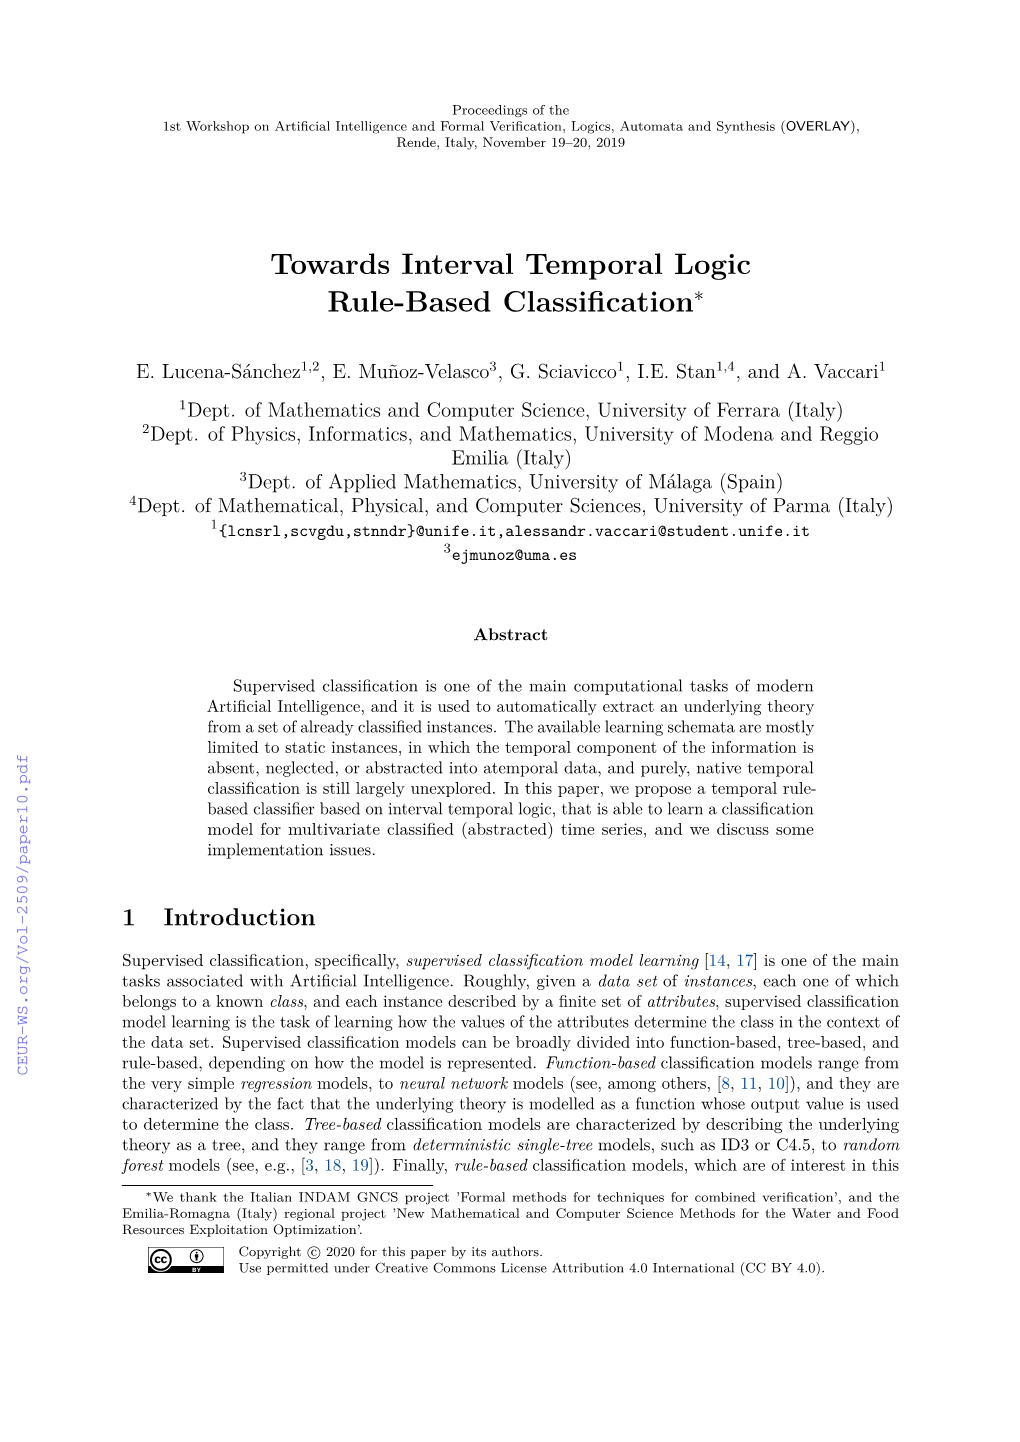 Towards Interval Temporal Logic Rule-Based Classification